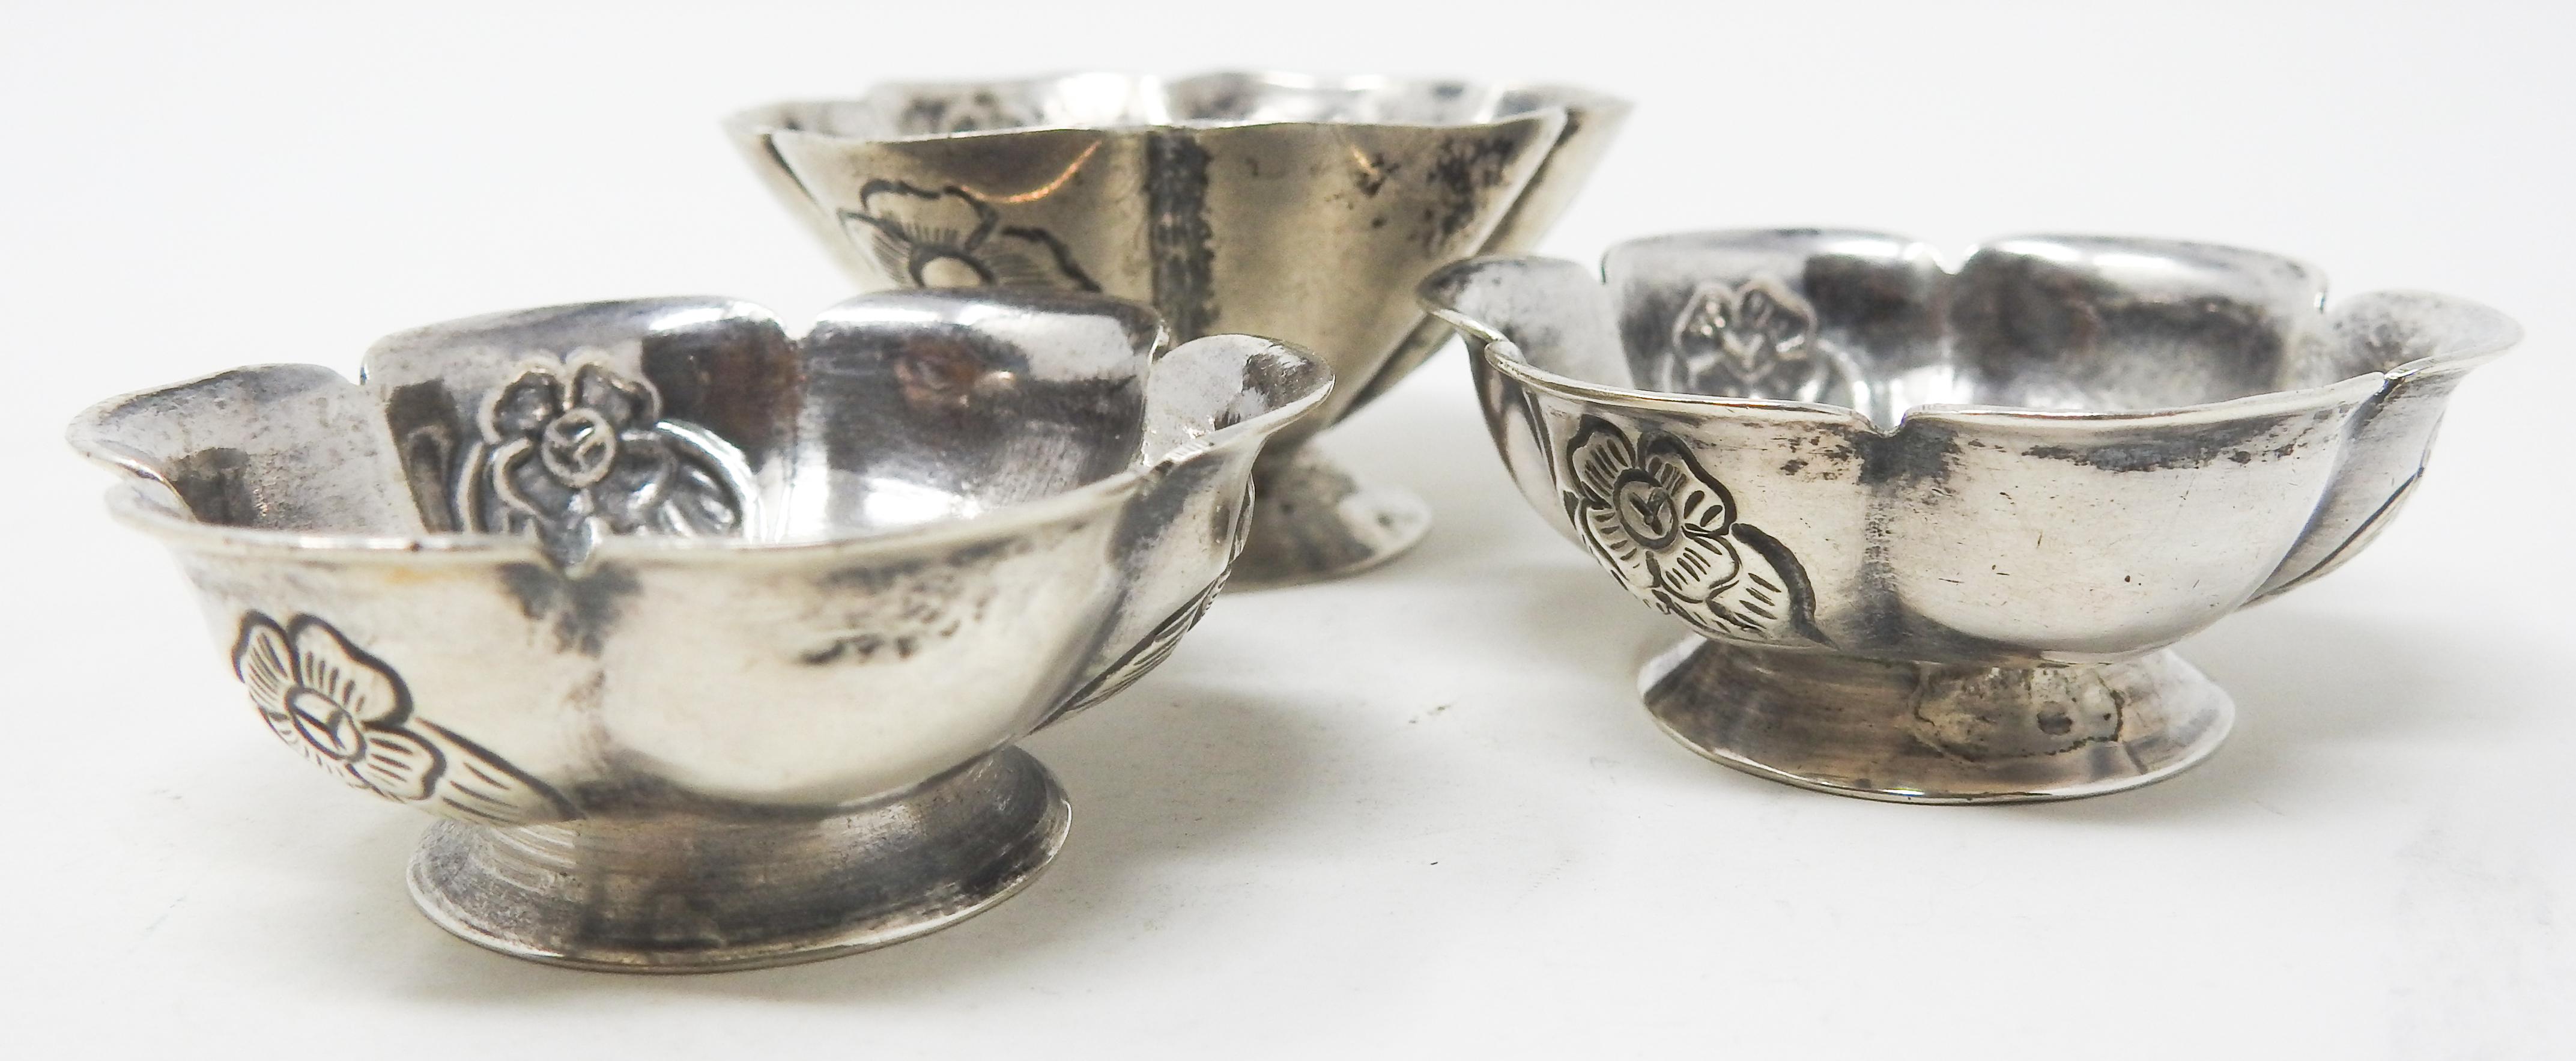 Offering this set of gorgeous Sanborns sterling silver salt wells. These are simple scalloped edge with floral and foliate detail engraved in every other scallop. The bottom of two are marked Sanborns, Mexico, and the other is just marked 900.